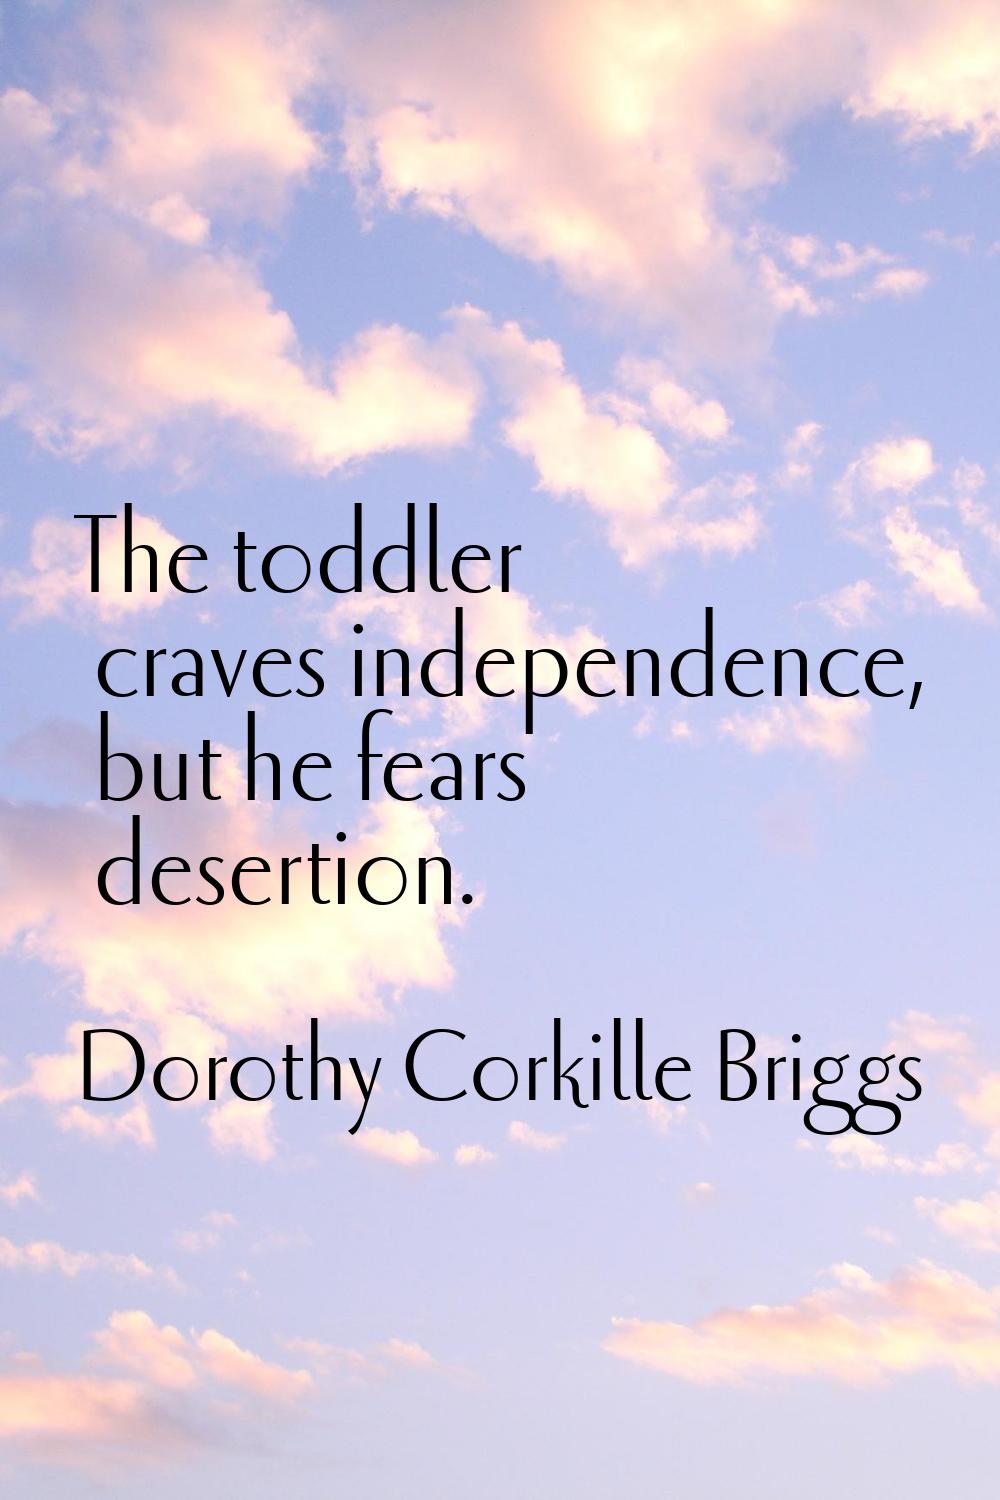 The toddler craves independence, but he fears desertion.